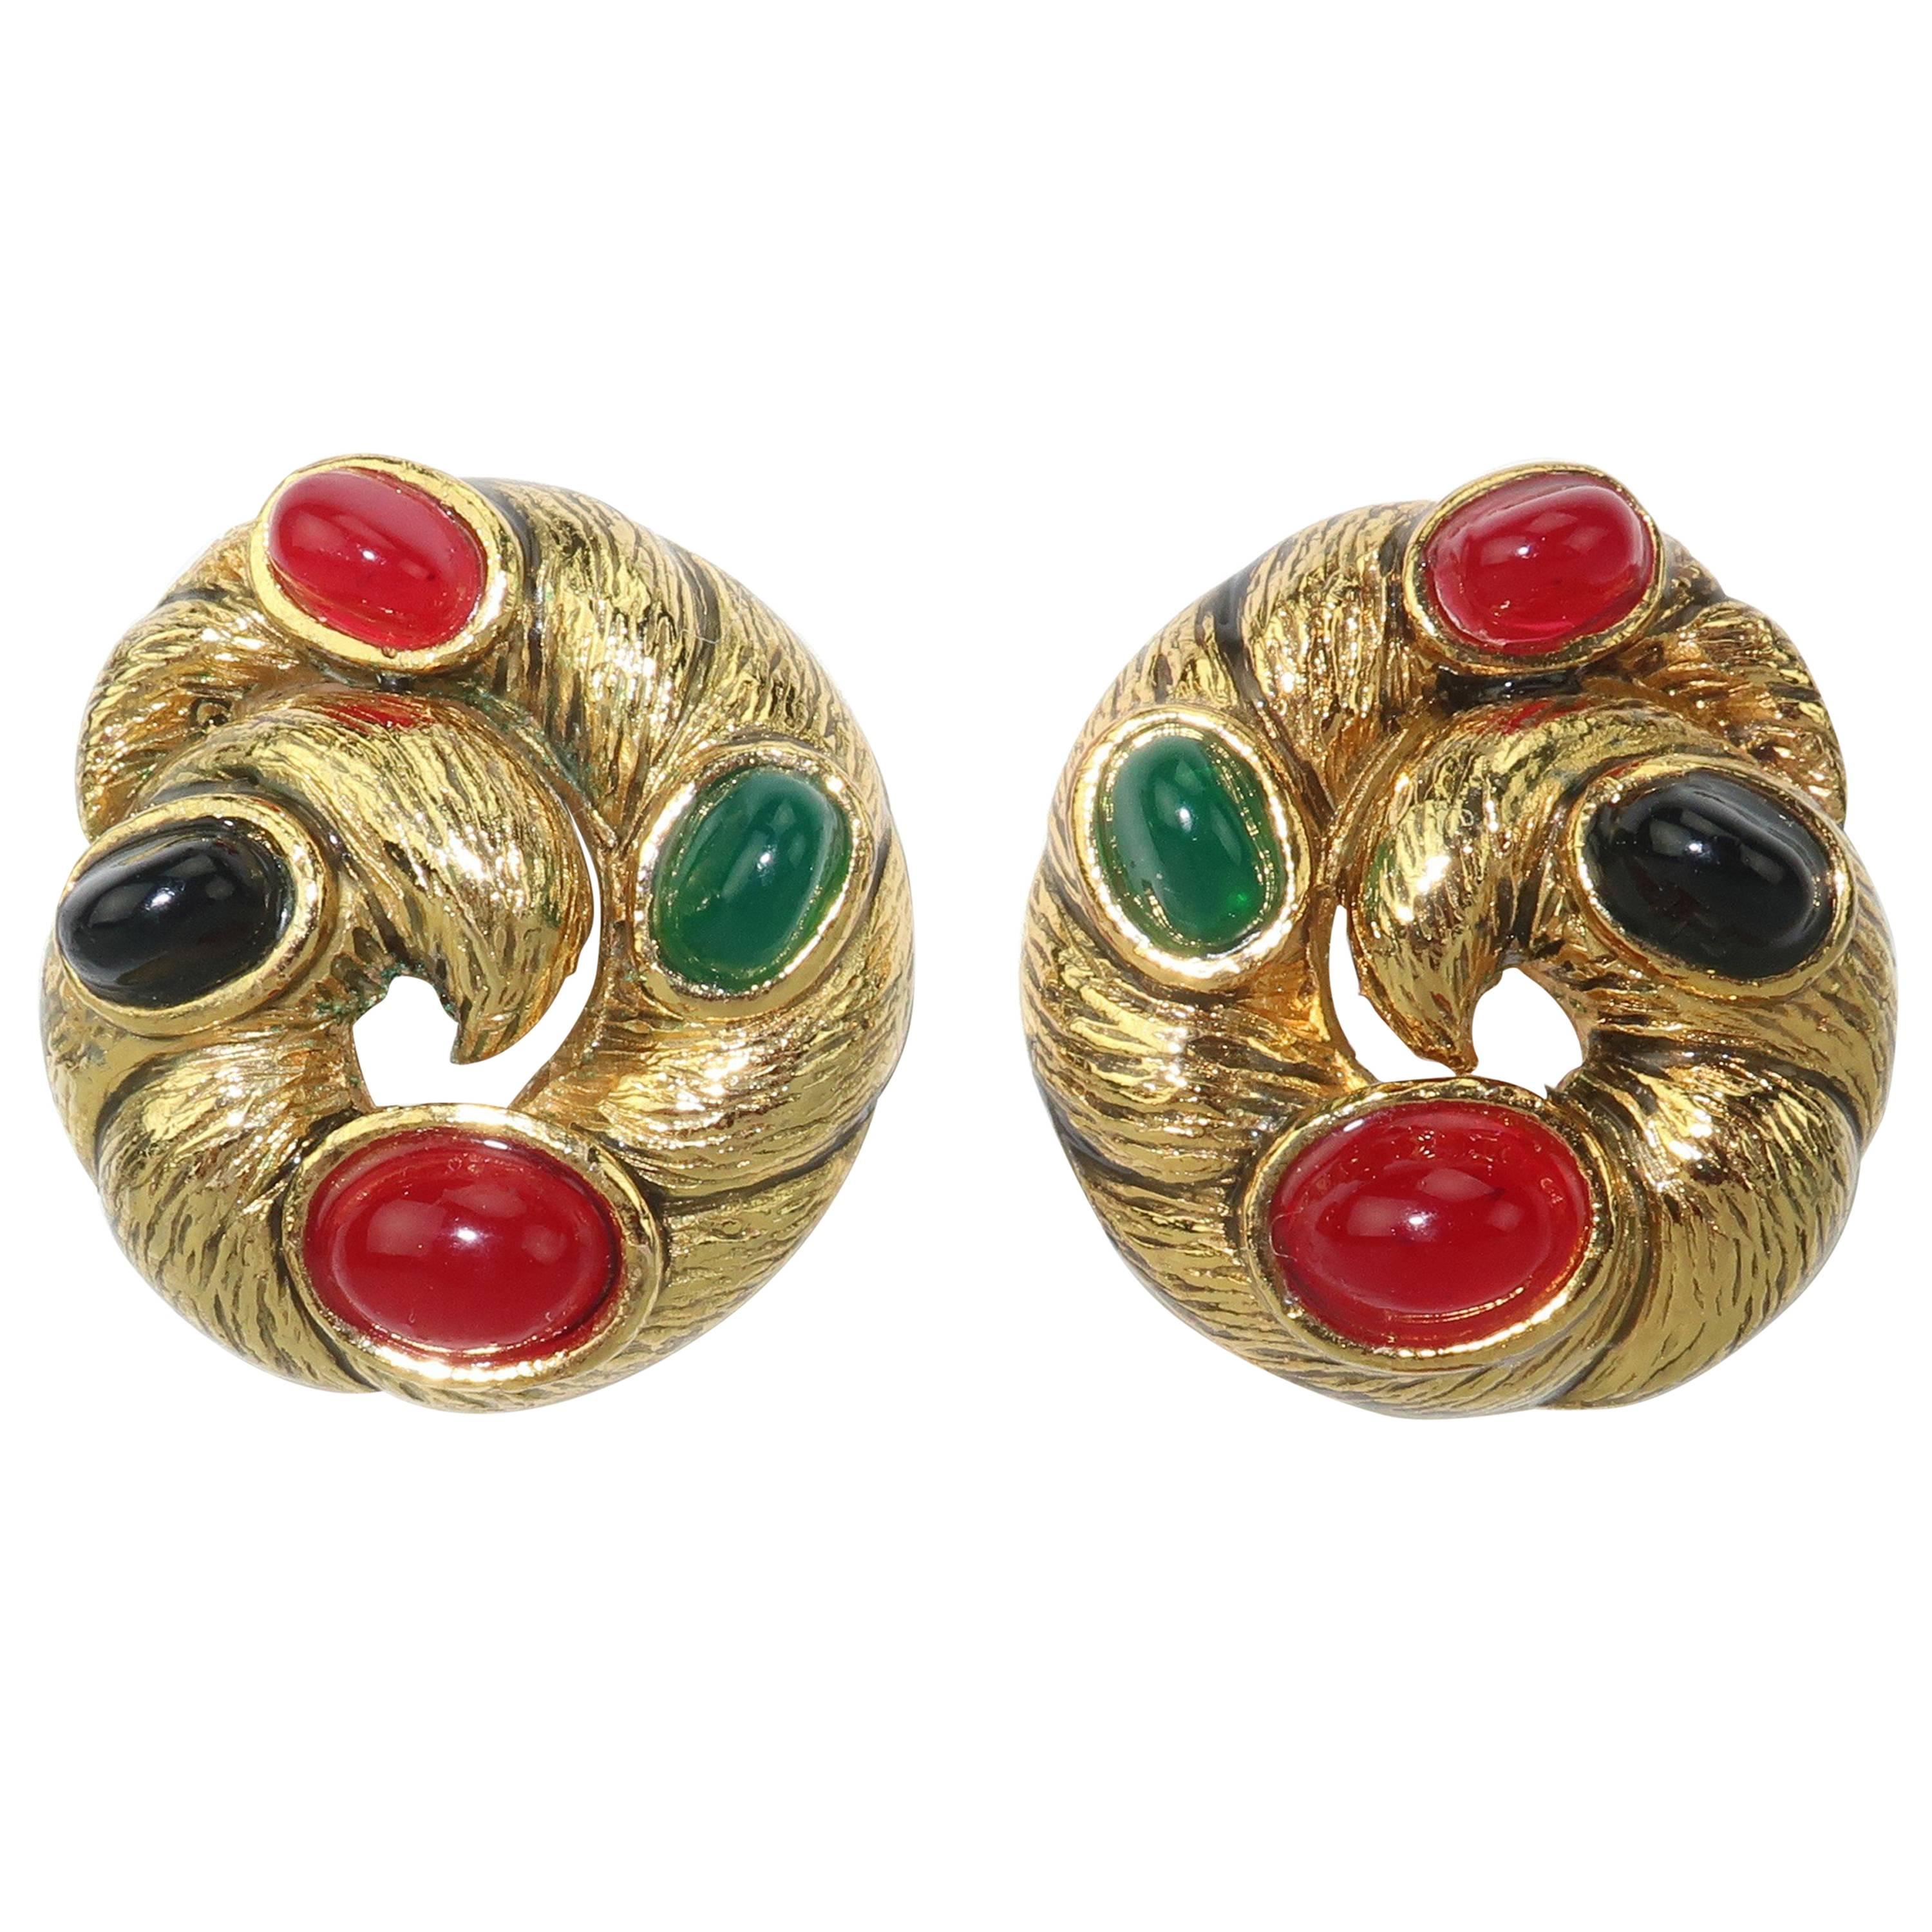 Vintage Gold Tone Cabochon Clip On Earrings